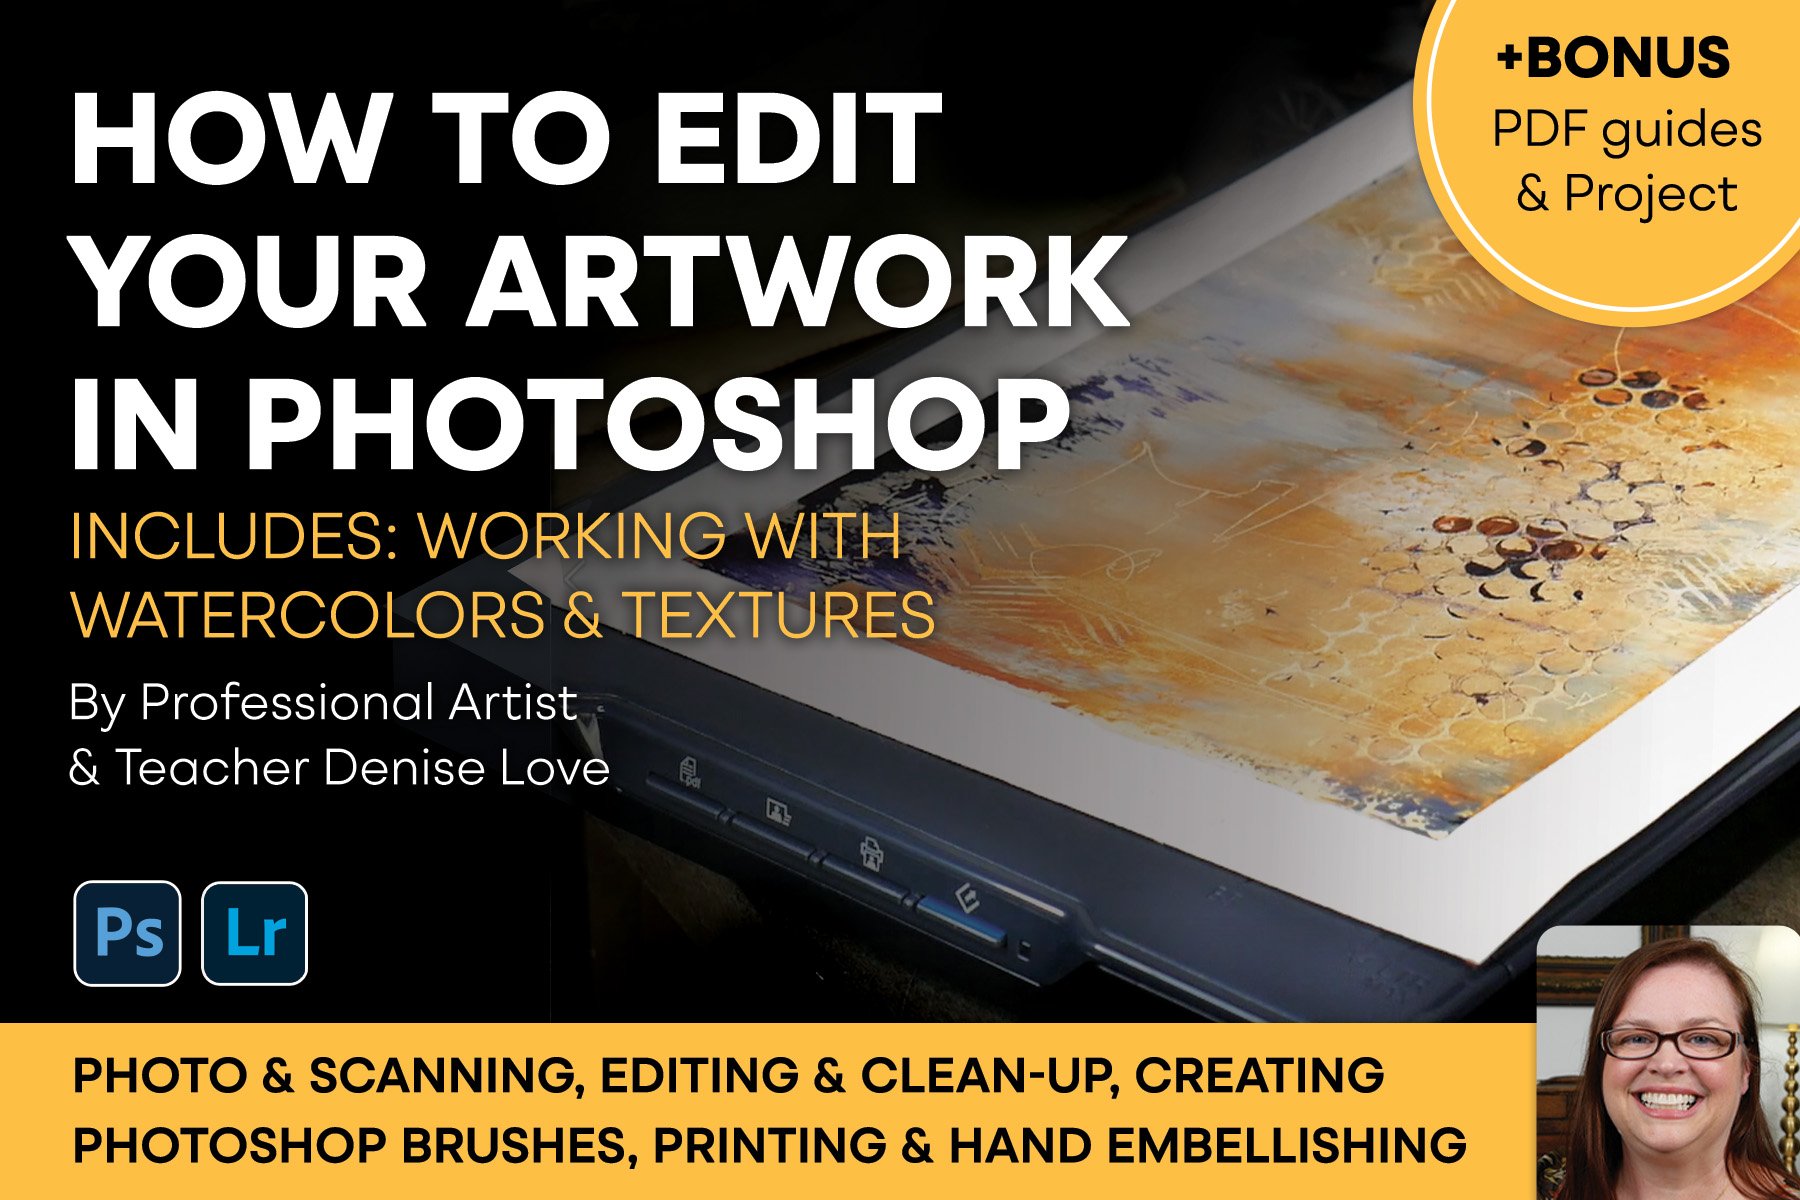 How To Scan & Edit Artwork In Photoshop To Create Beautiful Prints